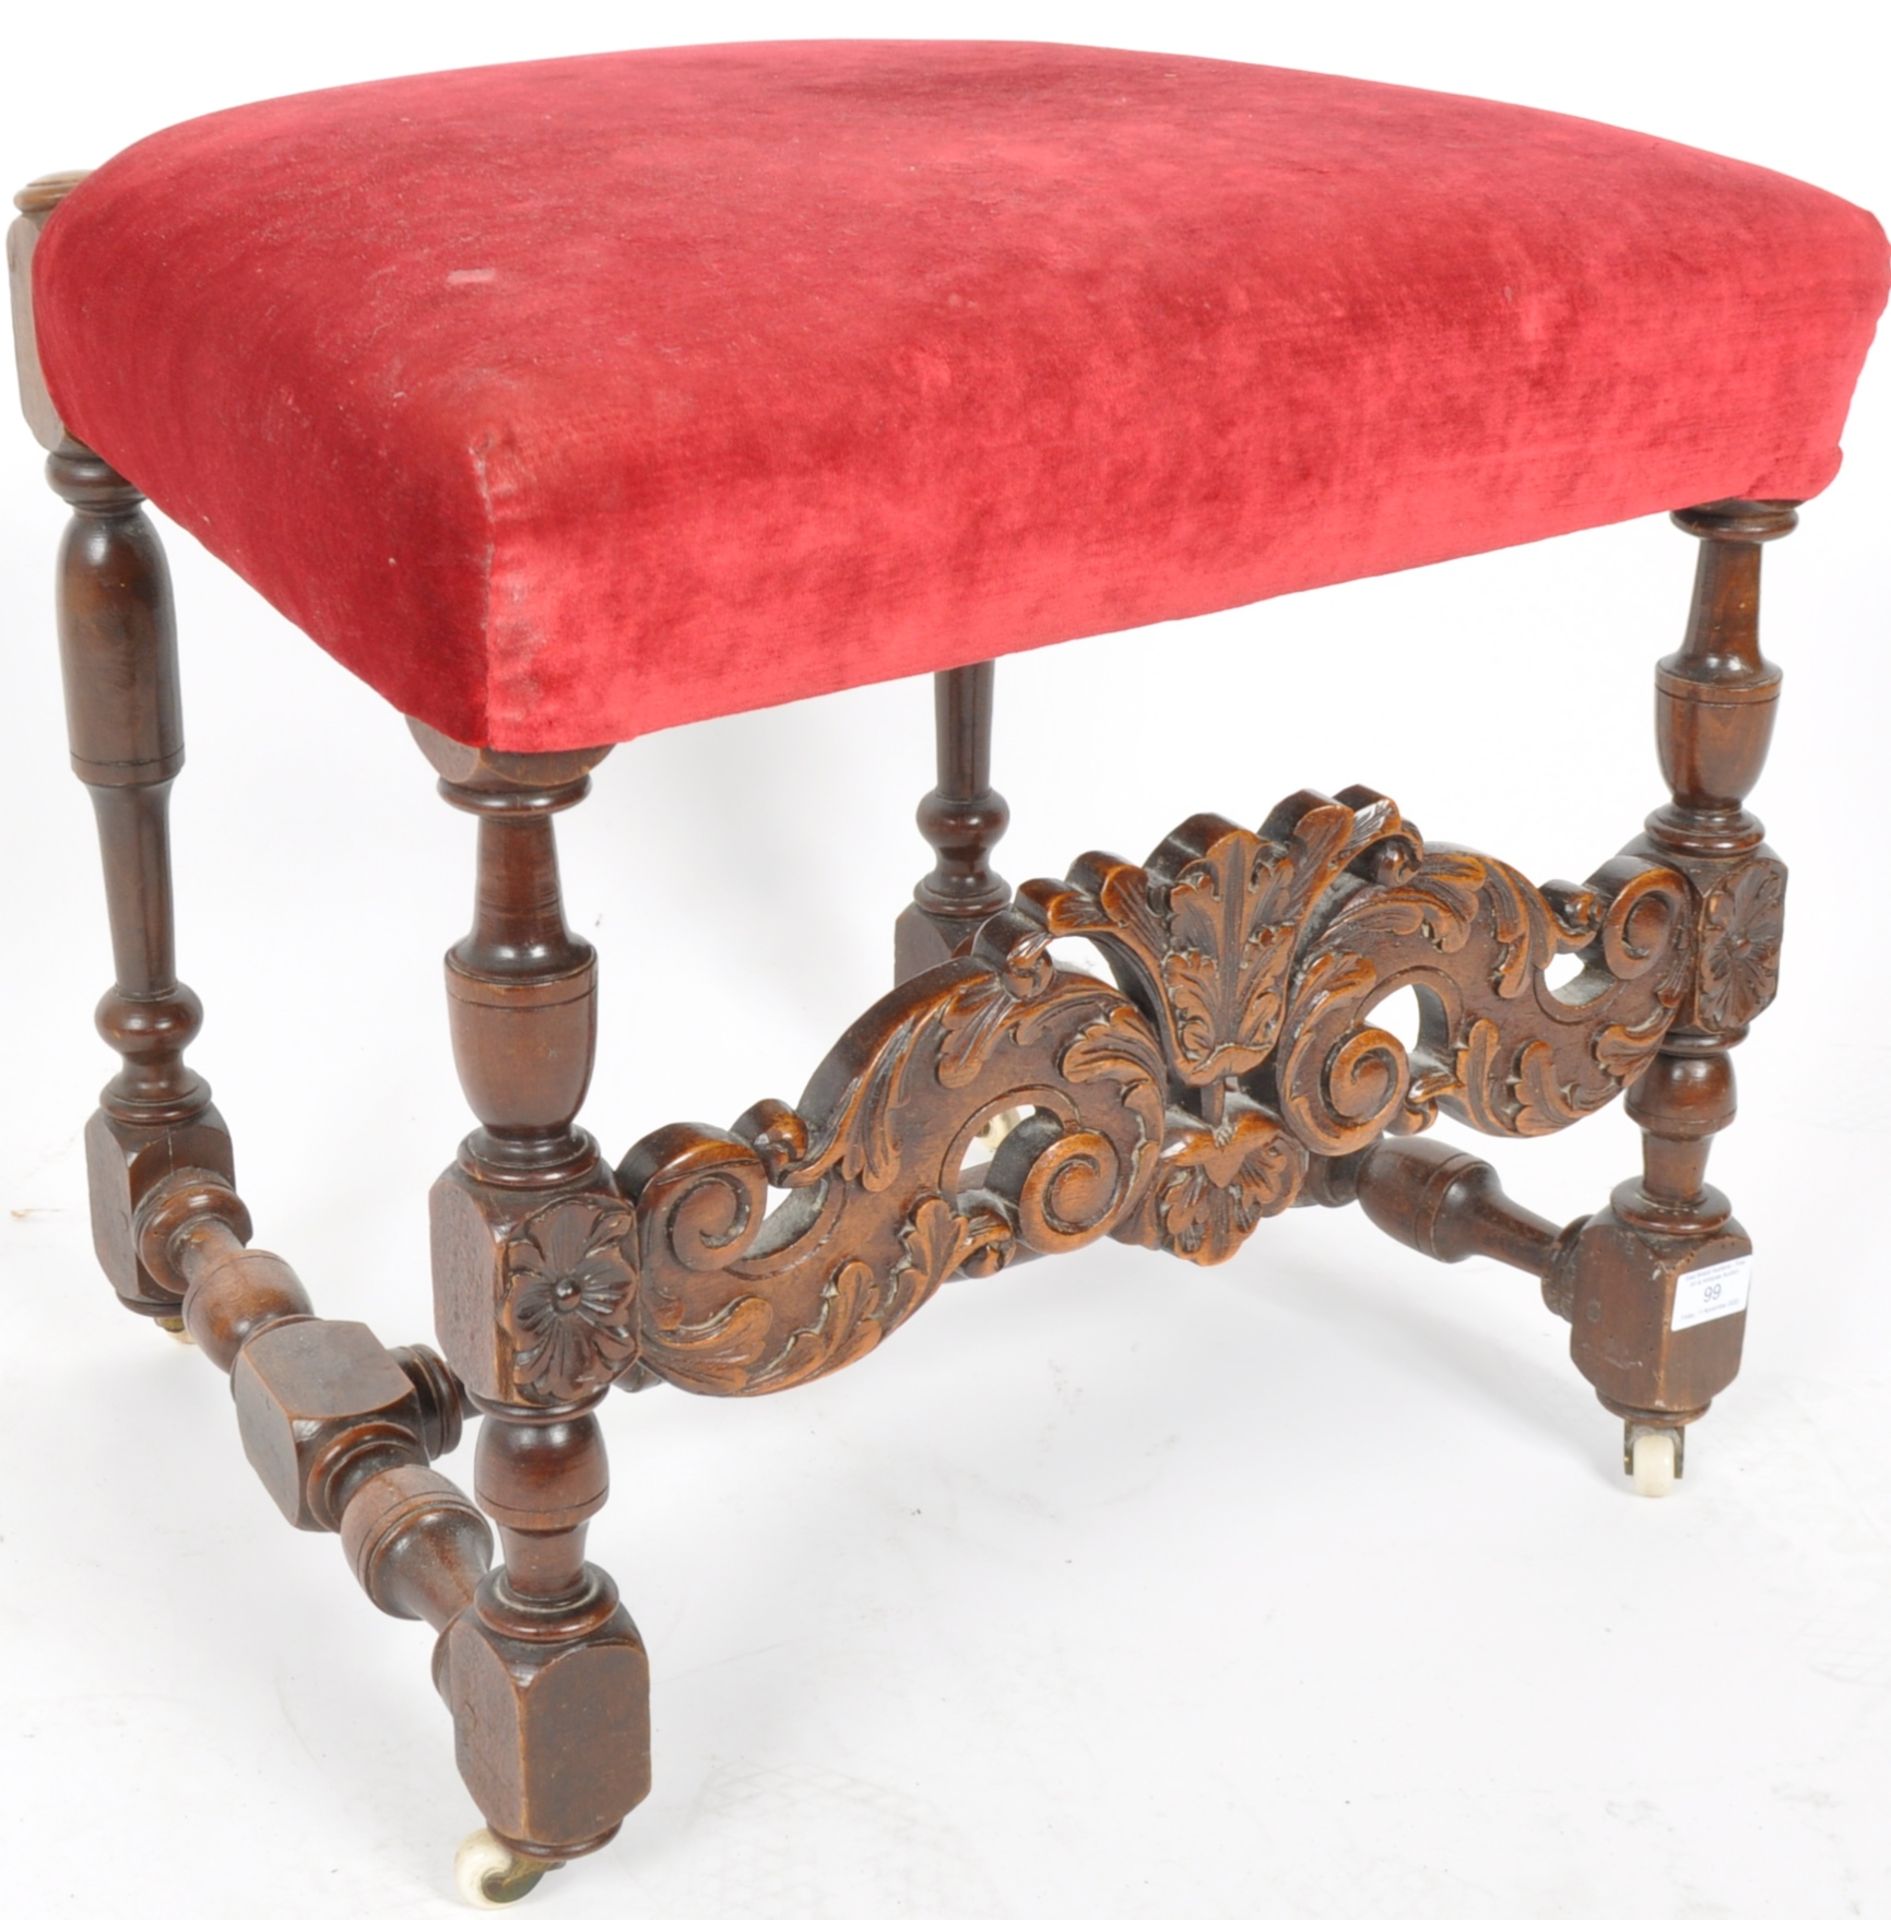 LATE 19TH CENTURY CARVED MAHOGANY STOOL - Image 2 of 5